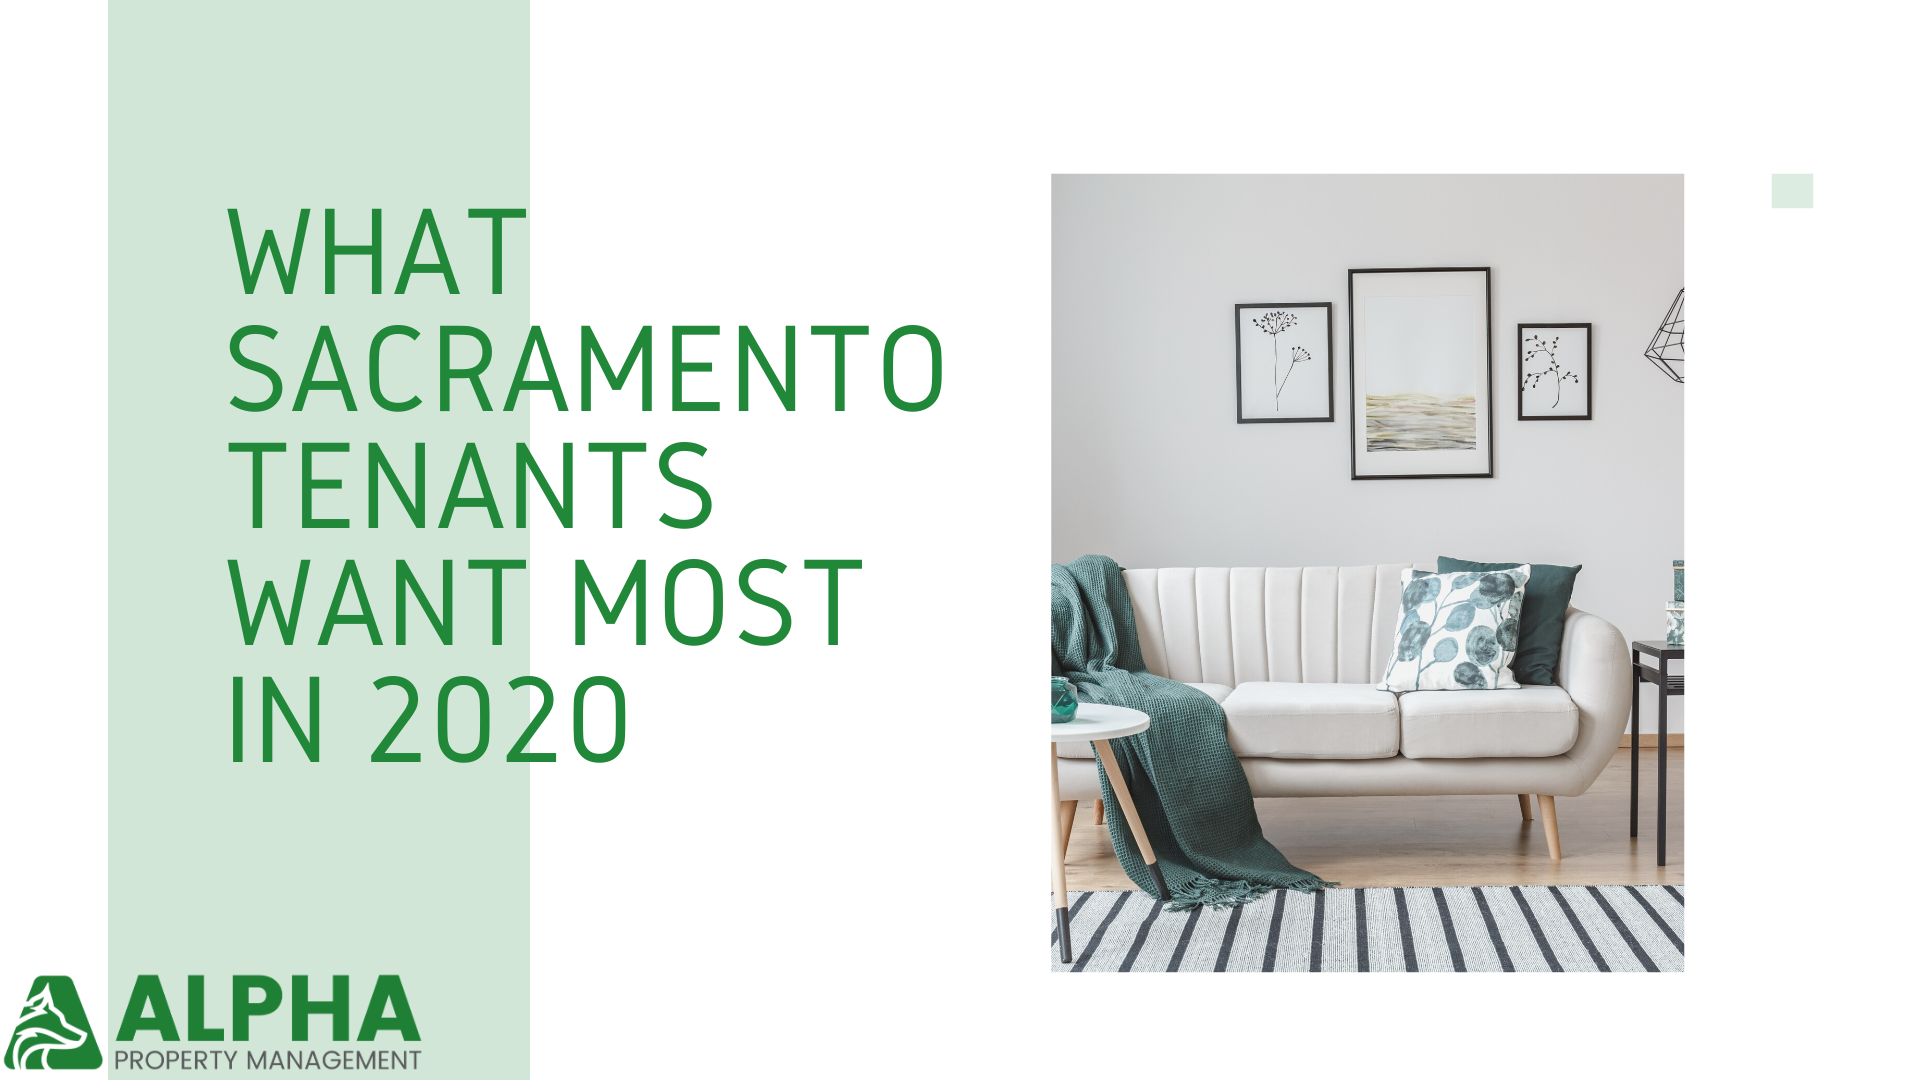 couch with pillows and blanket, text - What Sacramento tenants want most in 2020